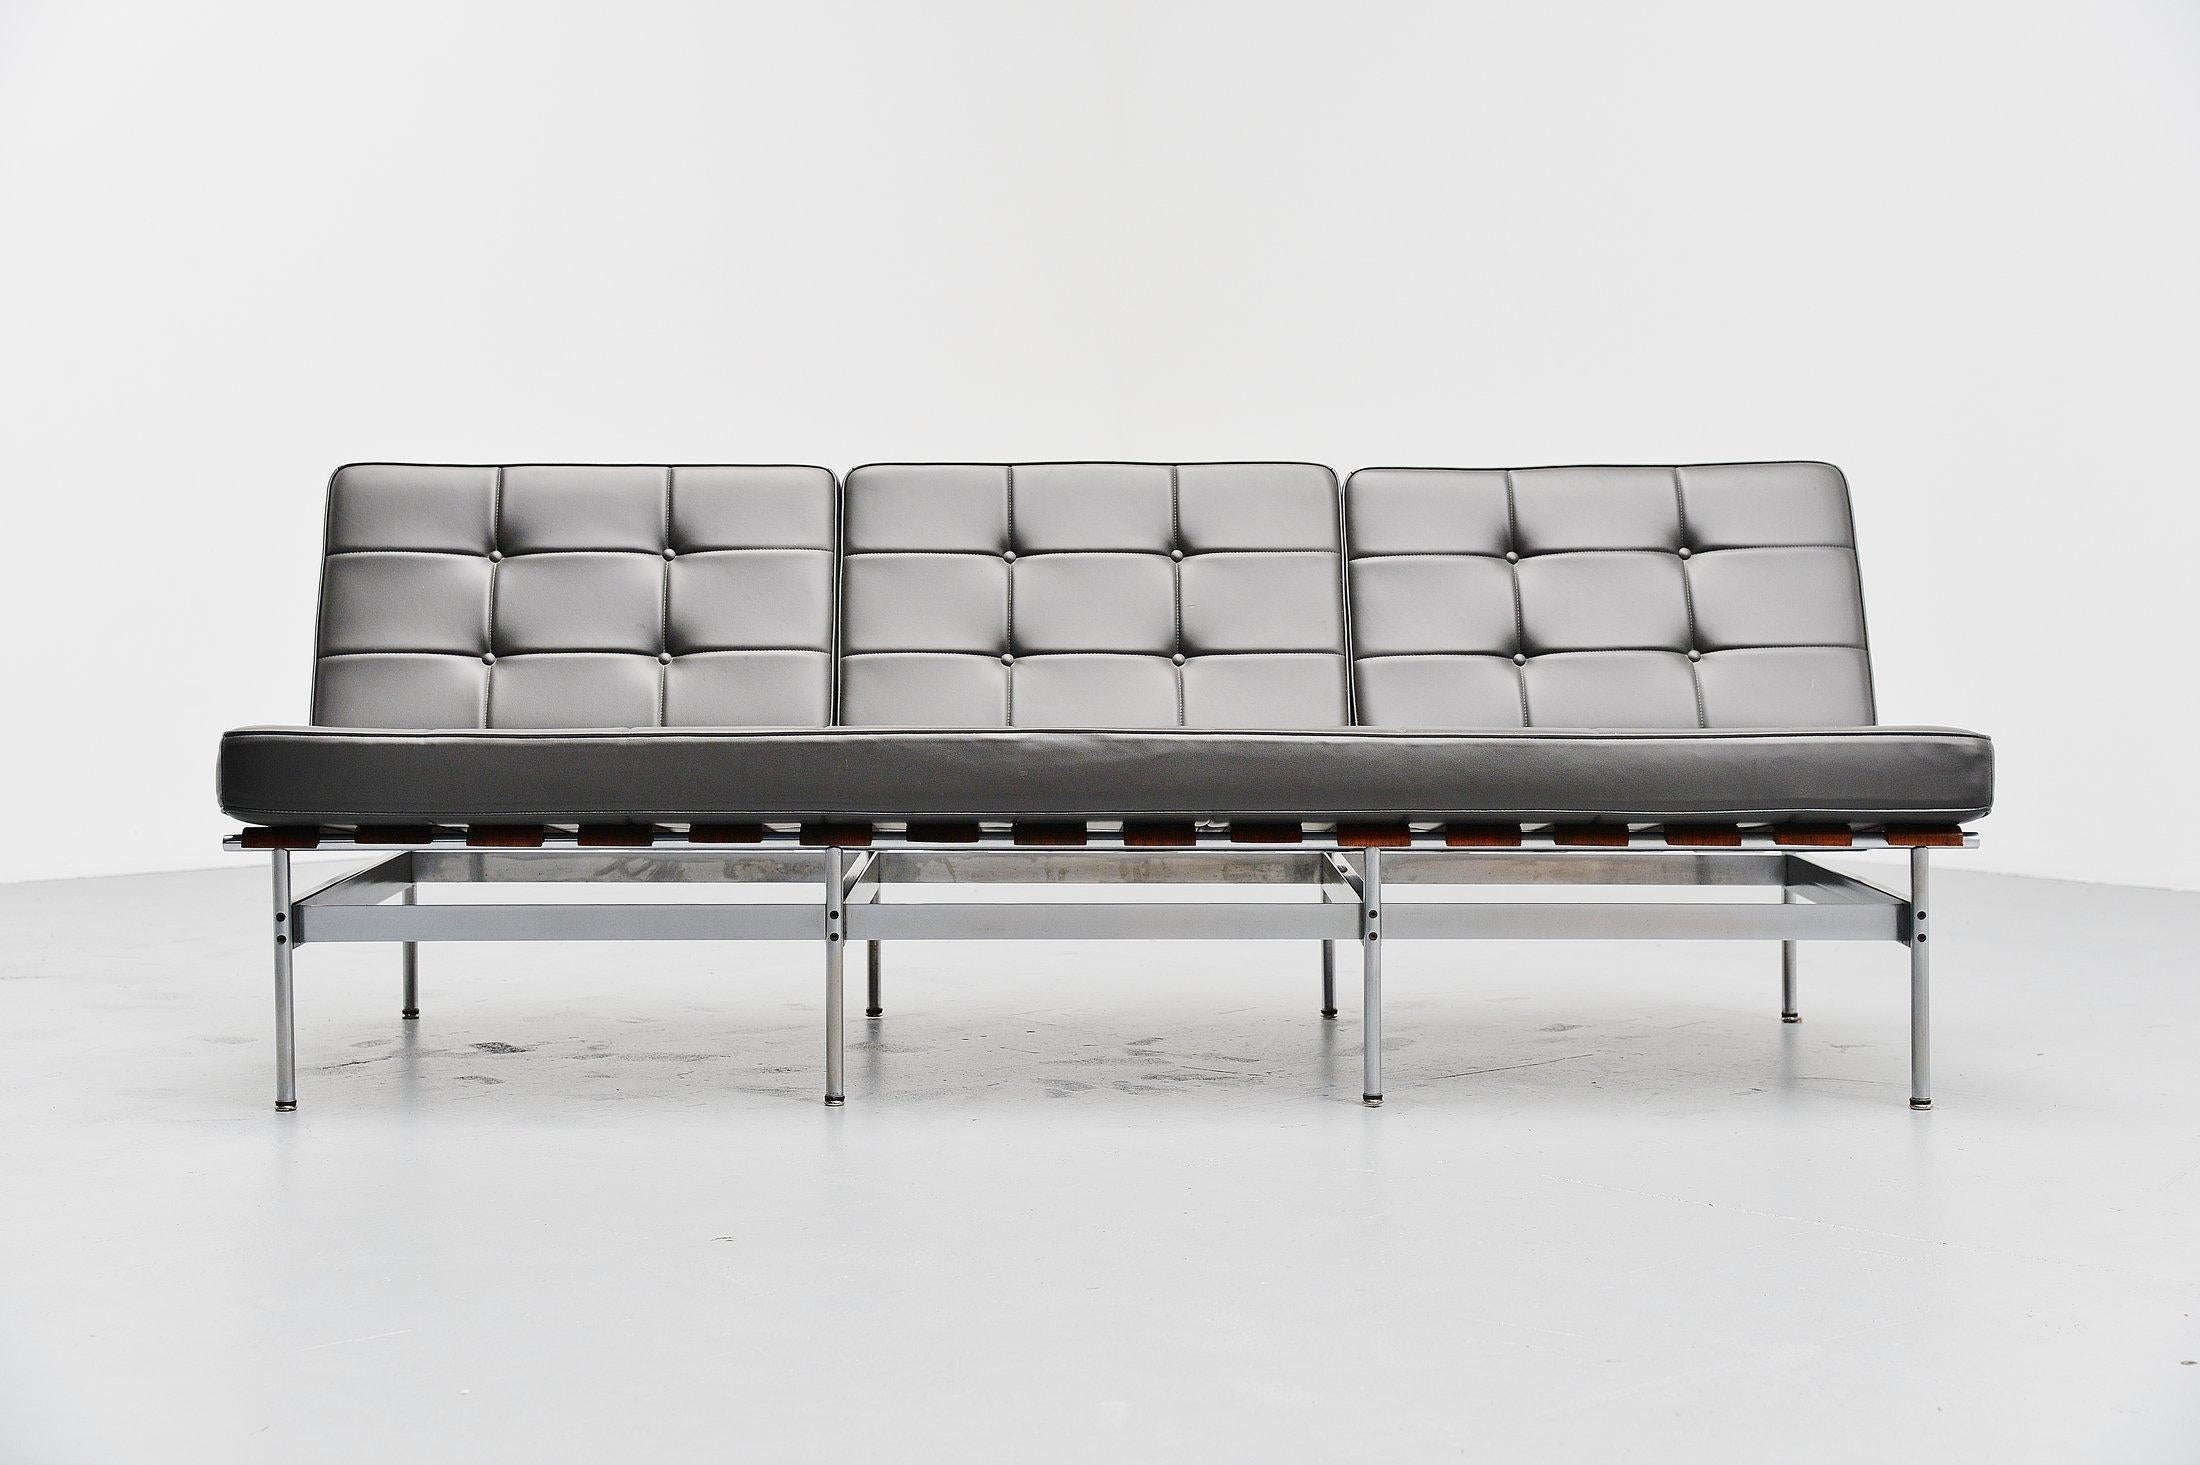 Highly rare and original 3-seat sofa Model 416/3 designed by Dutch designer Kho Liang Ie for Artifort, Holland 1959. This sofa was one of the nicest designs by Kho Liang Ie for Artifort, and very progressive for the time because of the mix of